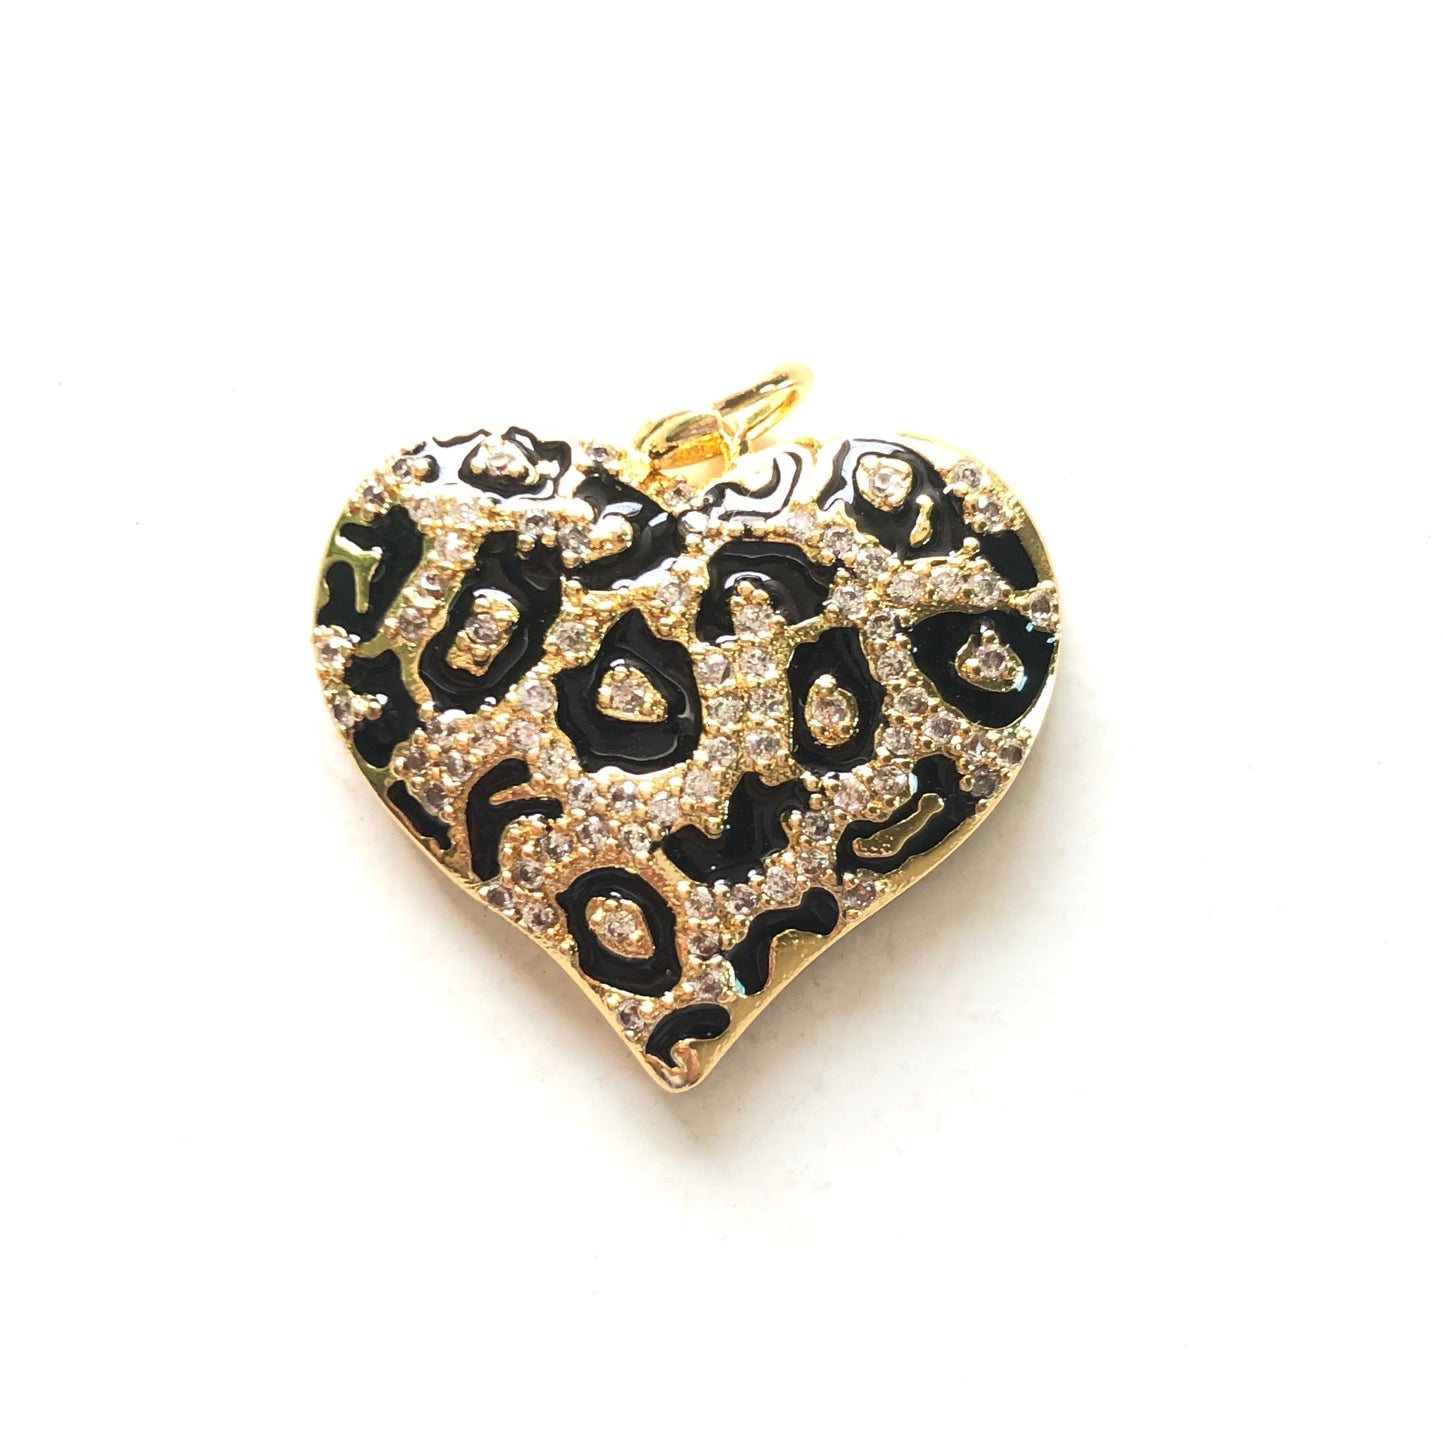 10pcs/lot 24.5*22mm CZ Paved Black Leopard Print Heart Charm Pendants Gold CZ Paved Charms Hearts Leopard Printed New Charms Arrivals Charms Beads Beyond